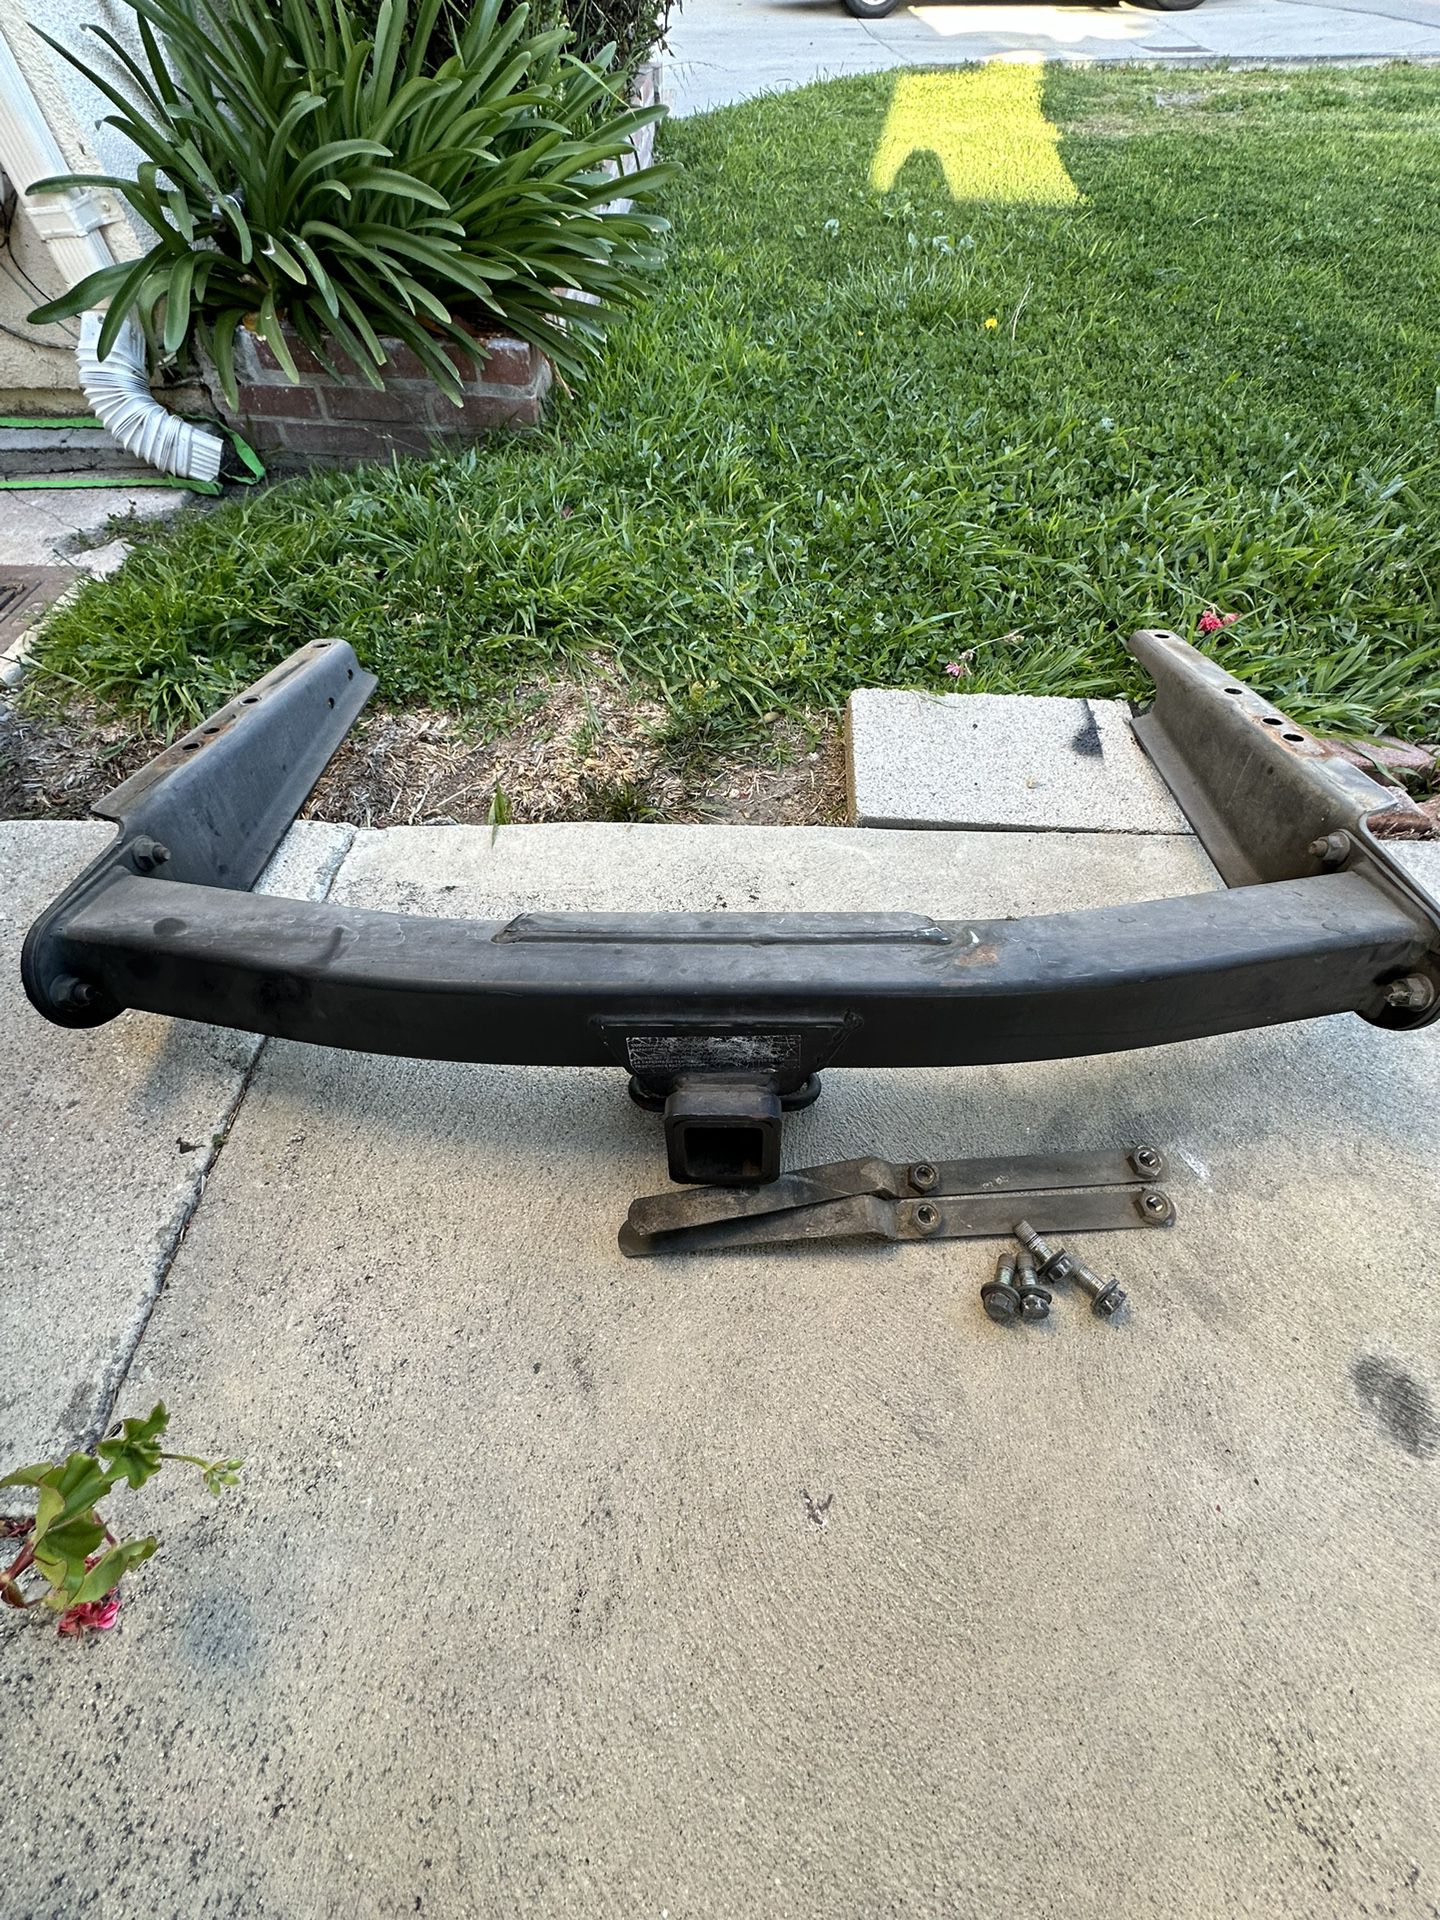 Toyota 4runner Tow Hitch 